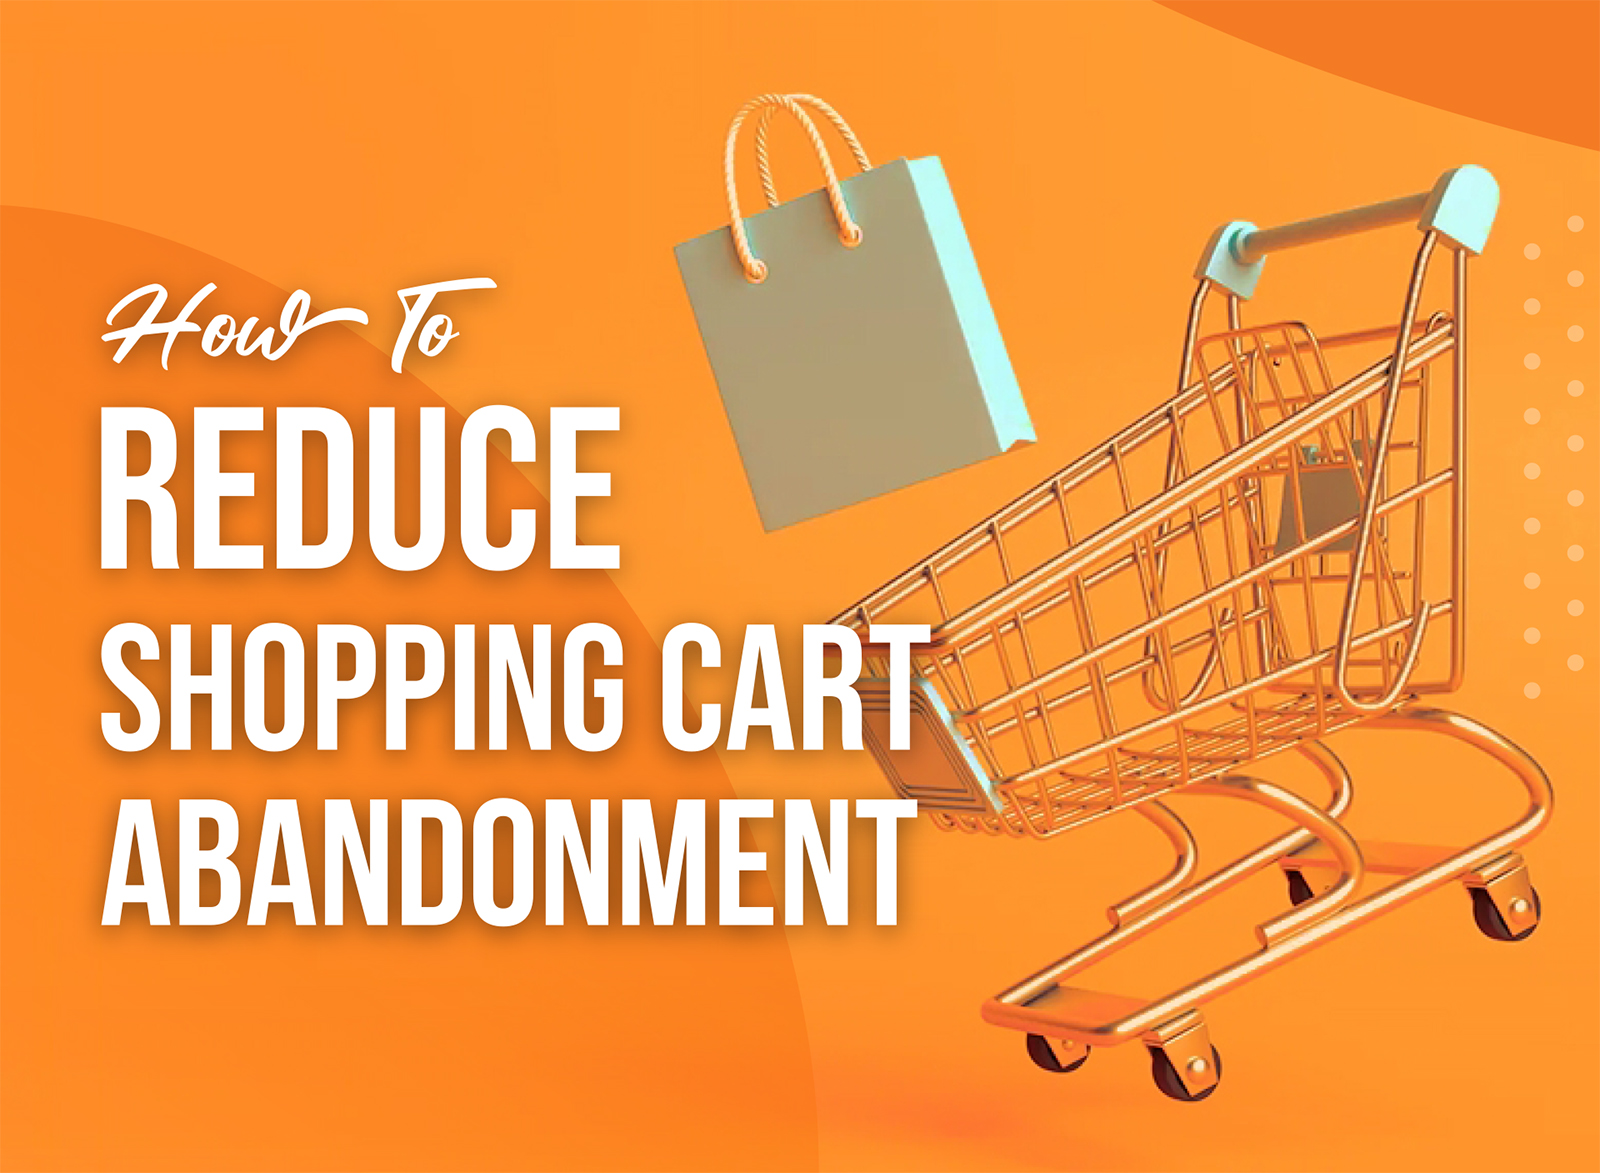 How To Reduce Shopping Cart Abandonment (The Concise 51 Point Guide)